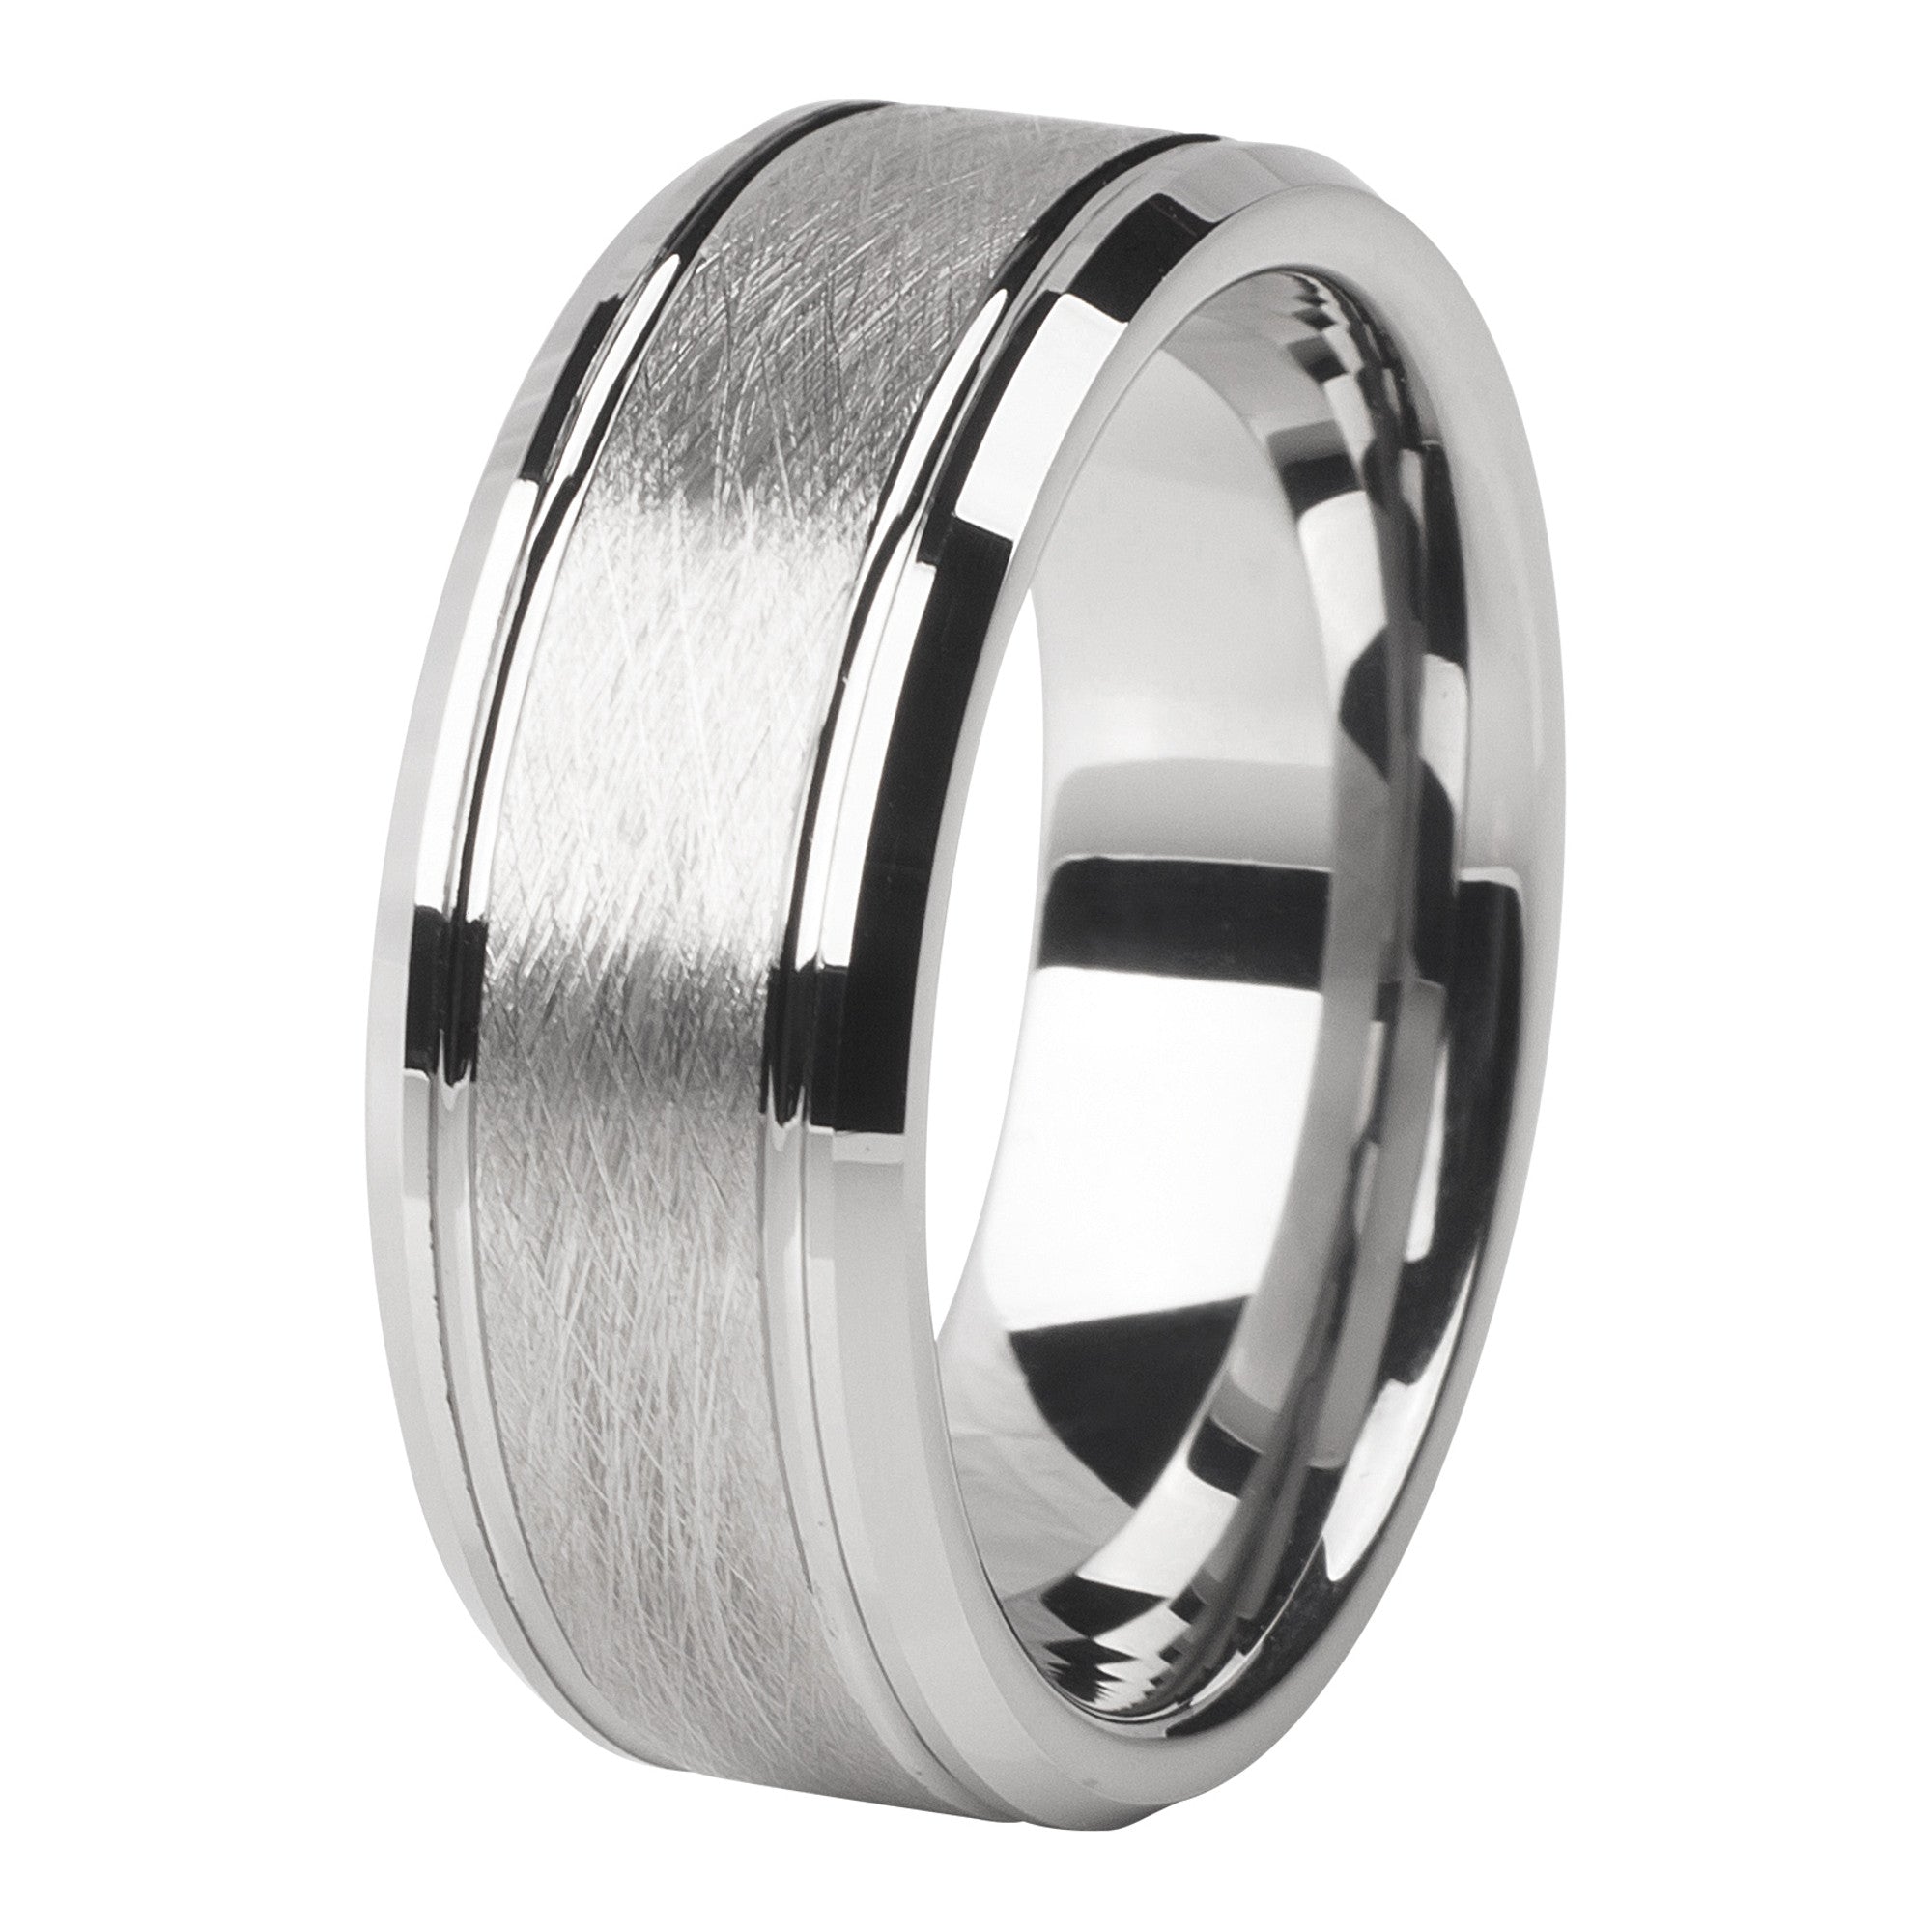 Afgeschaft Missionaris ik ben trots Brushed silver ring 8mm - Ring from MANOOCO | MANOOCO • Watches and  essential accessories